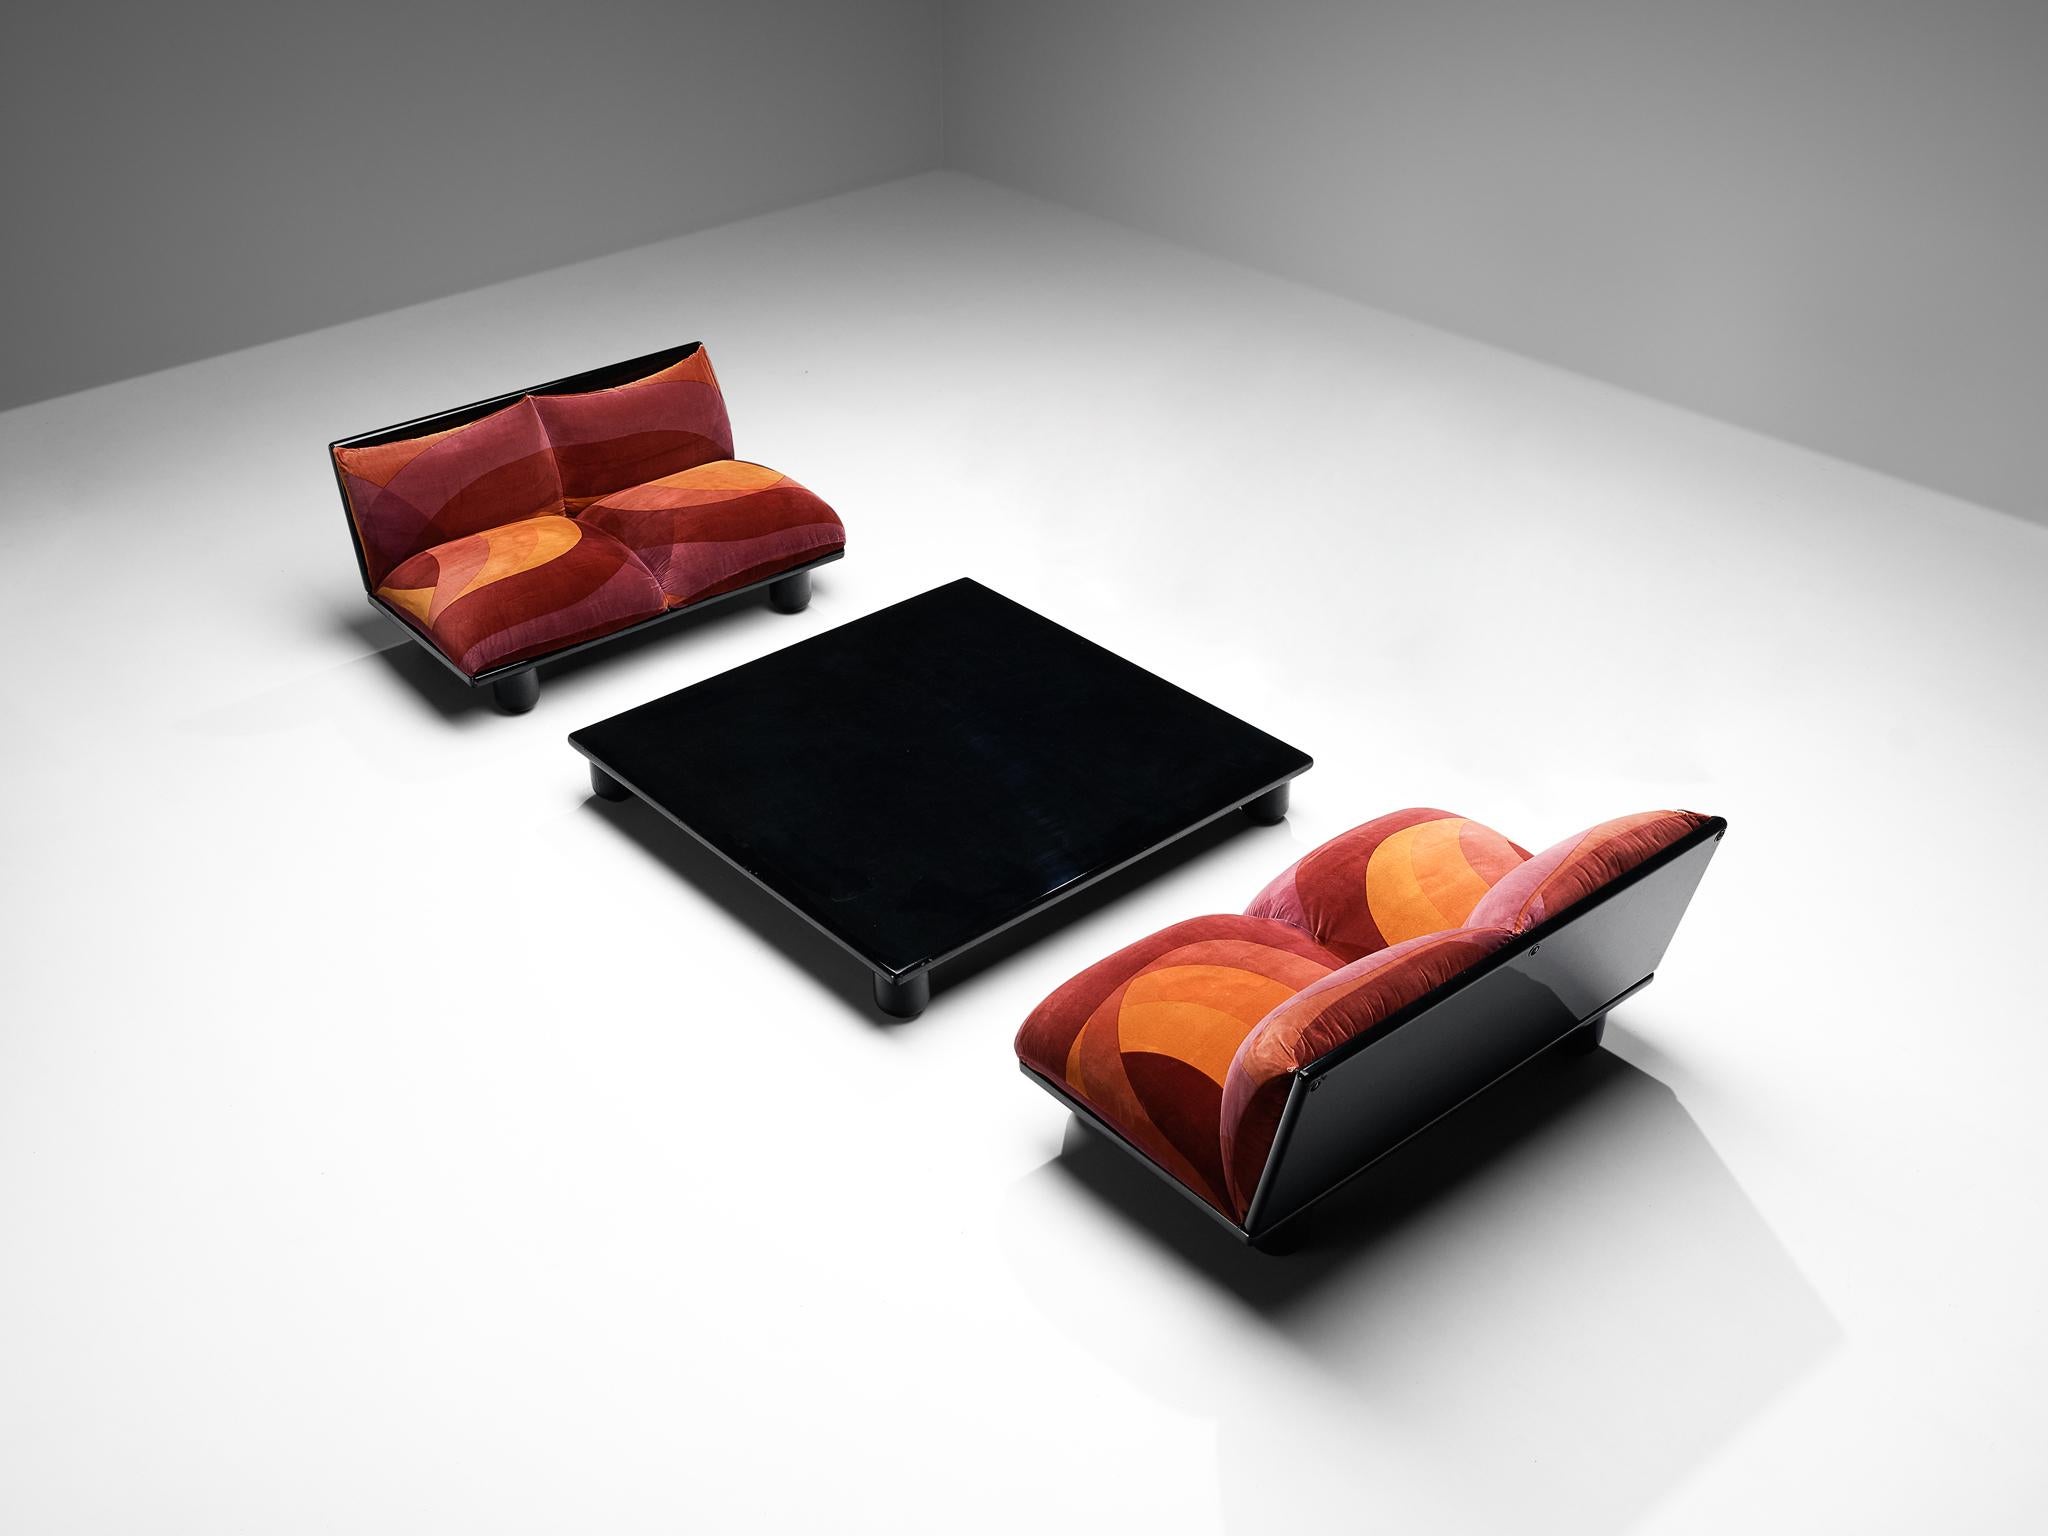 Carlo Bartoli for Rossi di Albizzate, pair of two-seat sofas and coffee table, model 'Blop', original velvet, lacquered wood, Italy, 1972

A postmodern design by Italian master of architecture and design Carlo Bartoli (1931-2020) known for his works